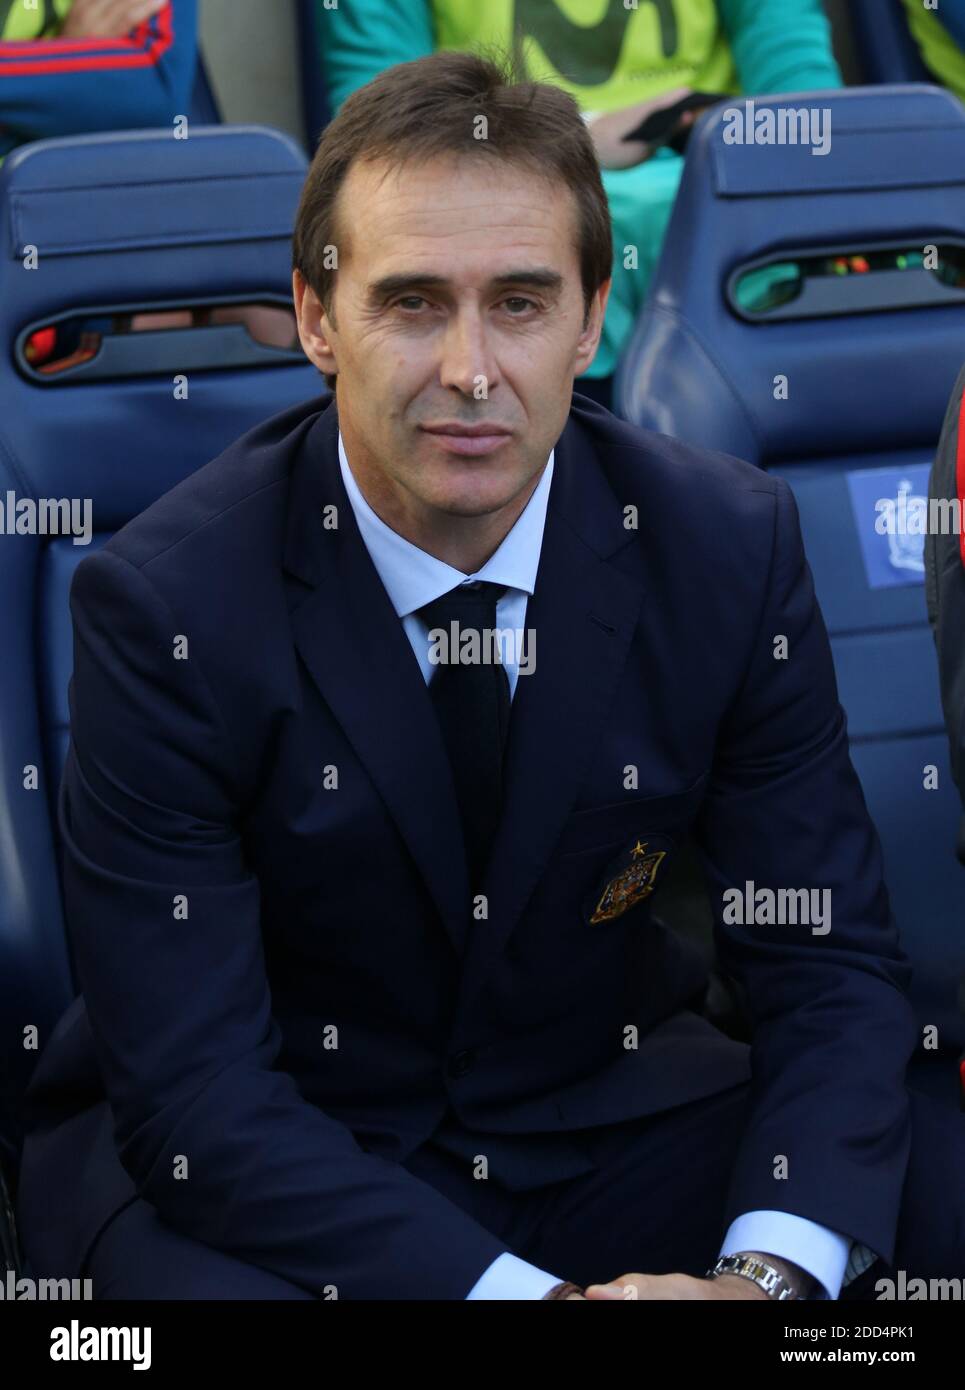 Sapin’s head coach Julen Lopetegui during Spain v Switzerland international friendly match in Villareal, Spain, June 3, 2018. The game finished in a 1-1 draw. Photo by Giuliano Bevilacqua/ABACAPRESS.COM Stock Photo